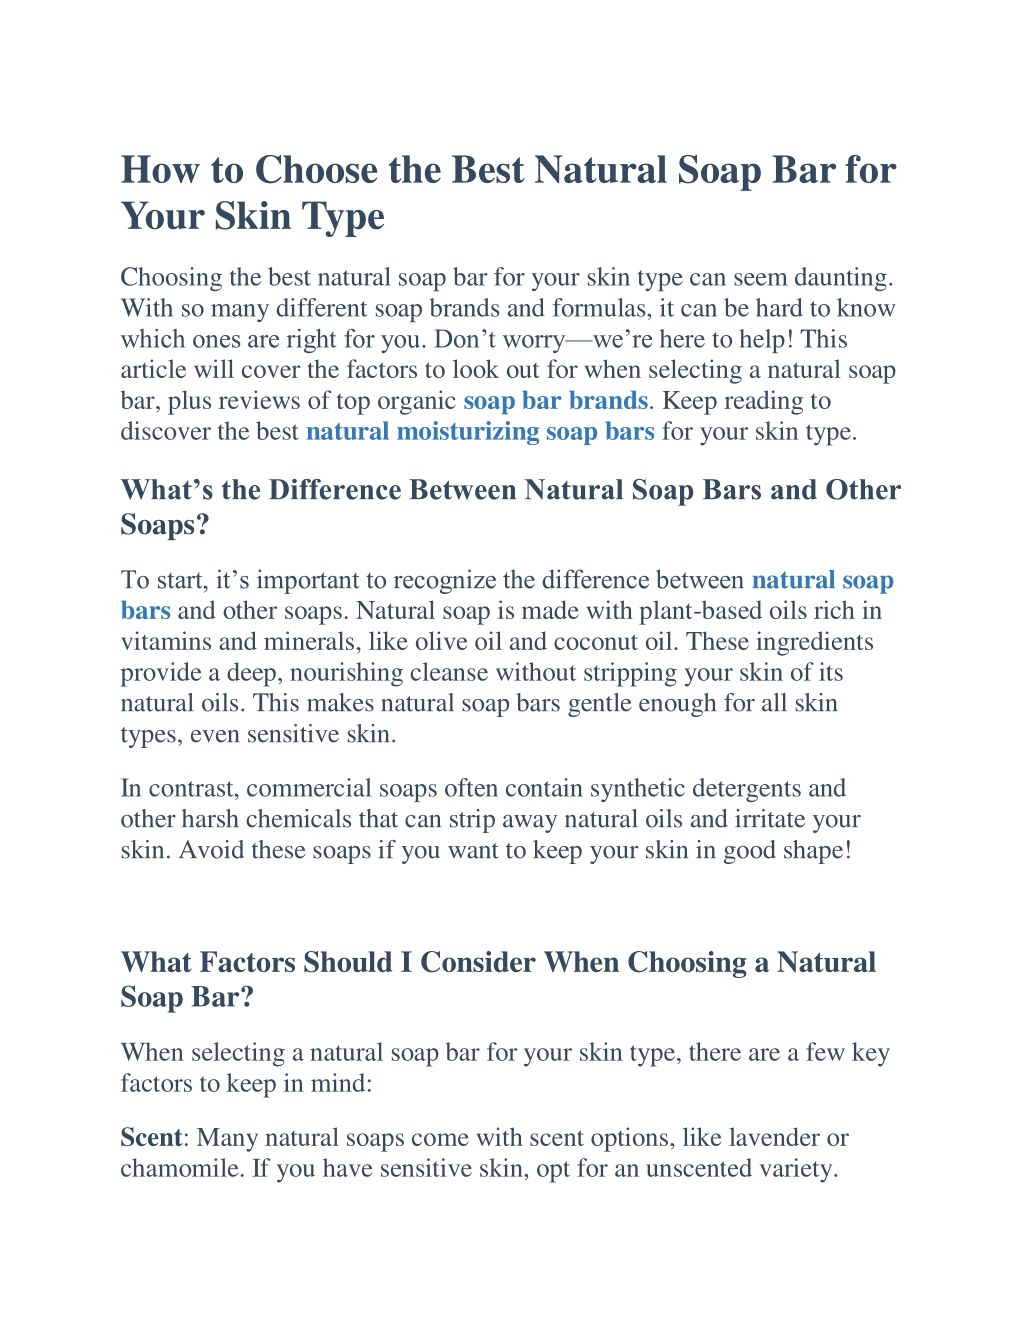 Choosing the Best Type of Bar Soap for Your Skin